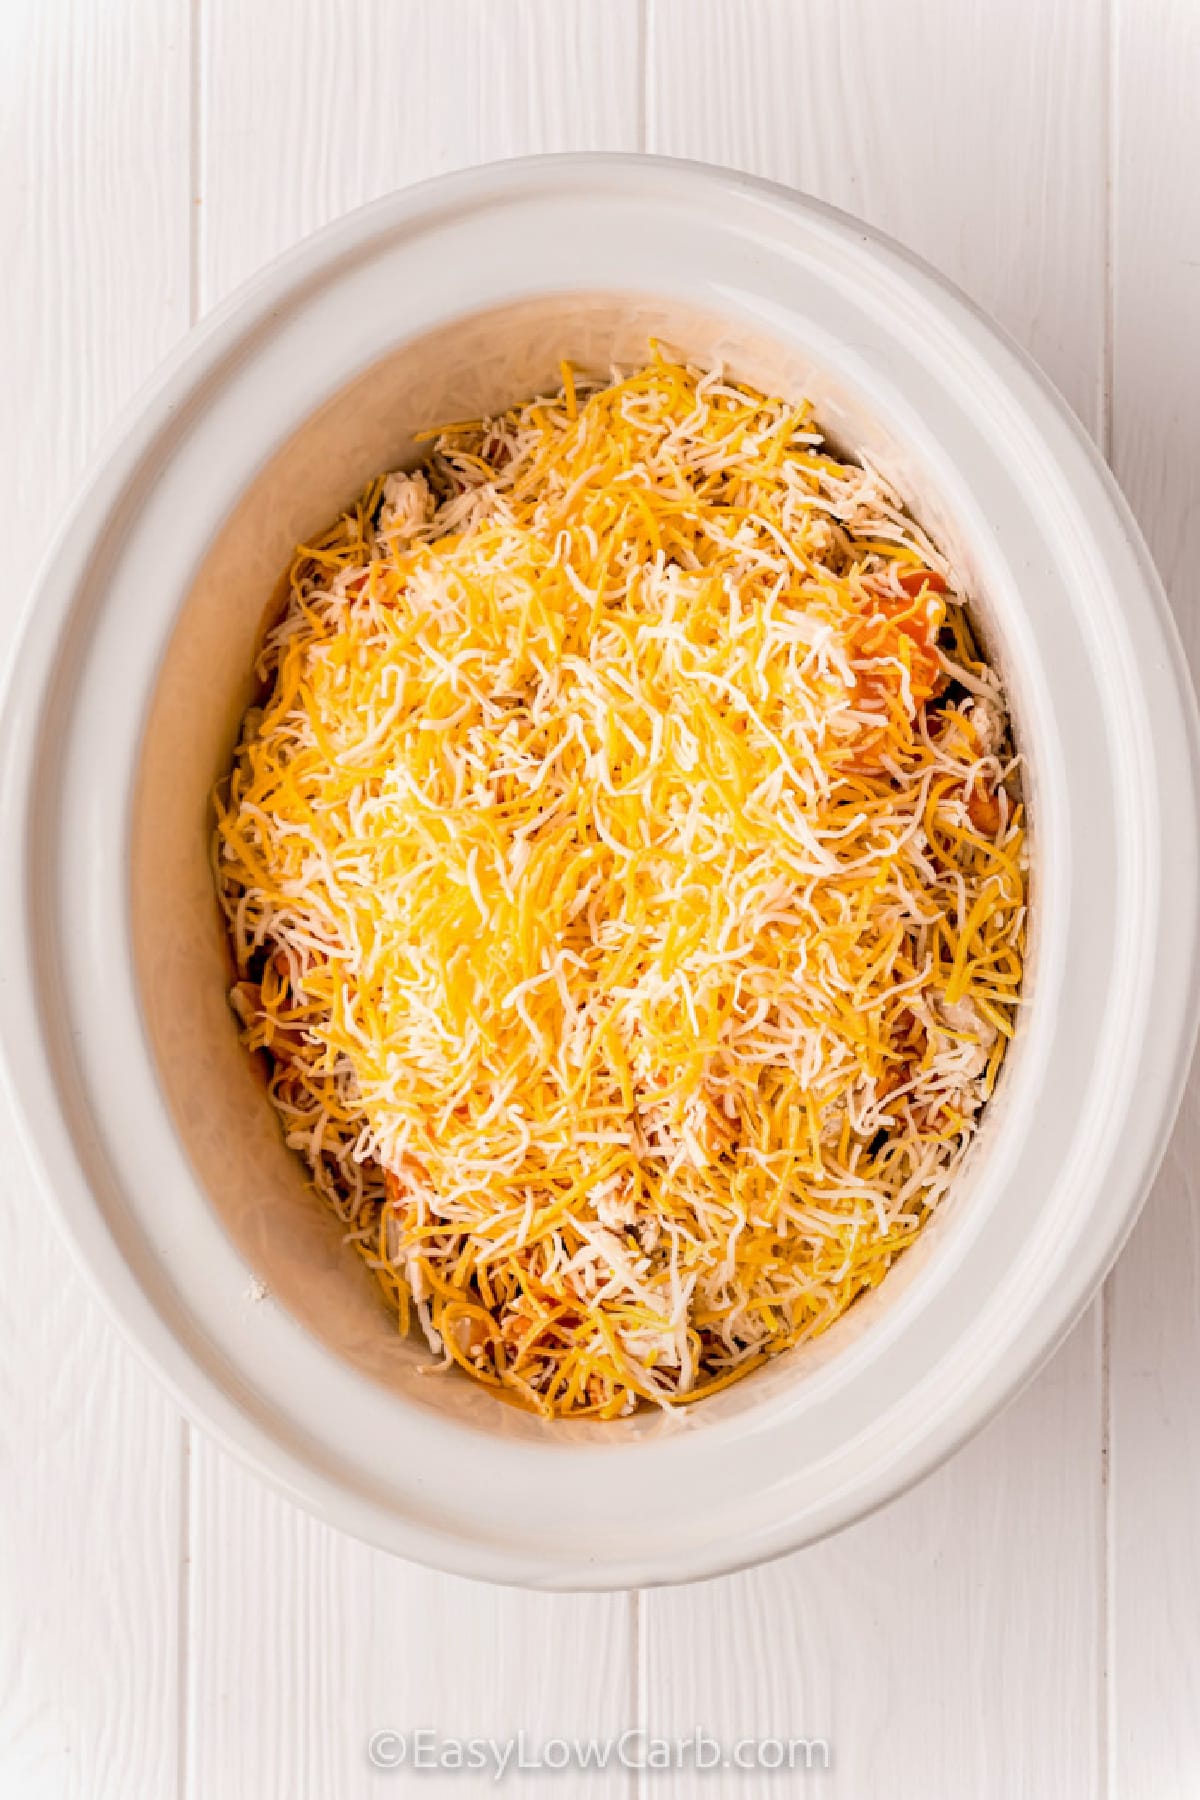 shredded cheese added to the other ingredients in a crock pot to make crock pot buffalo chicken dip recipe